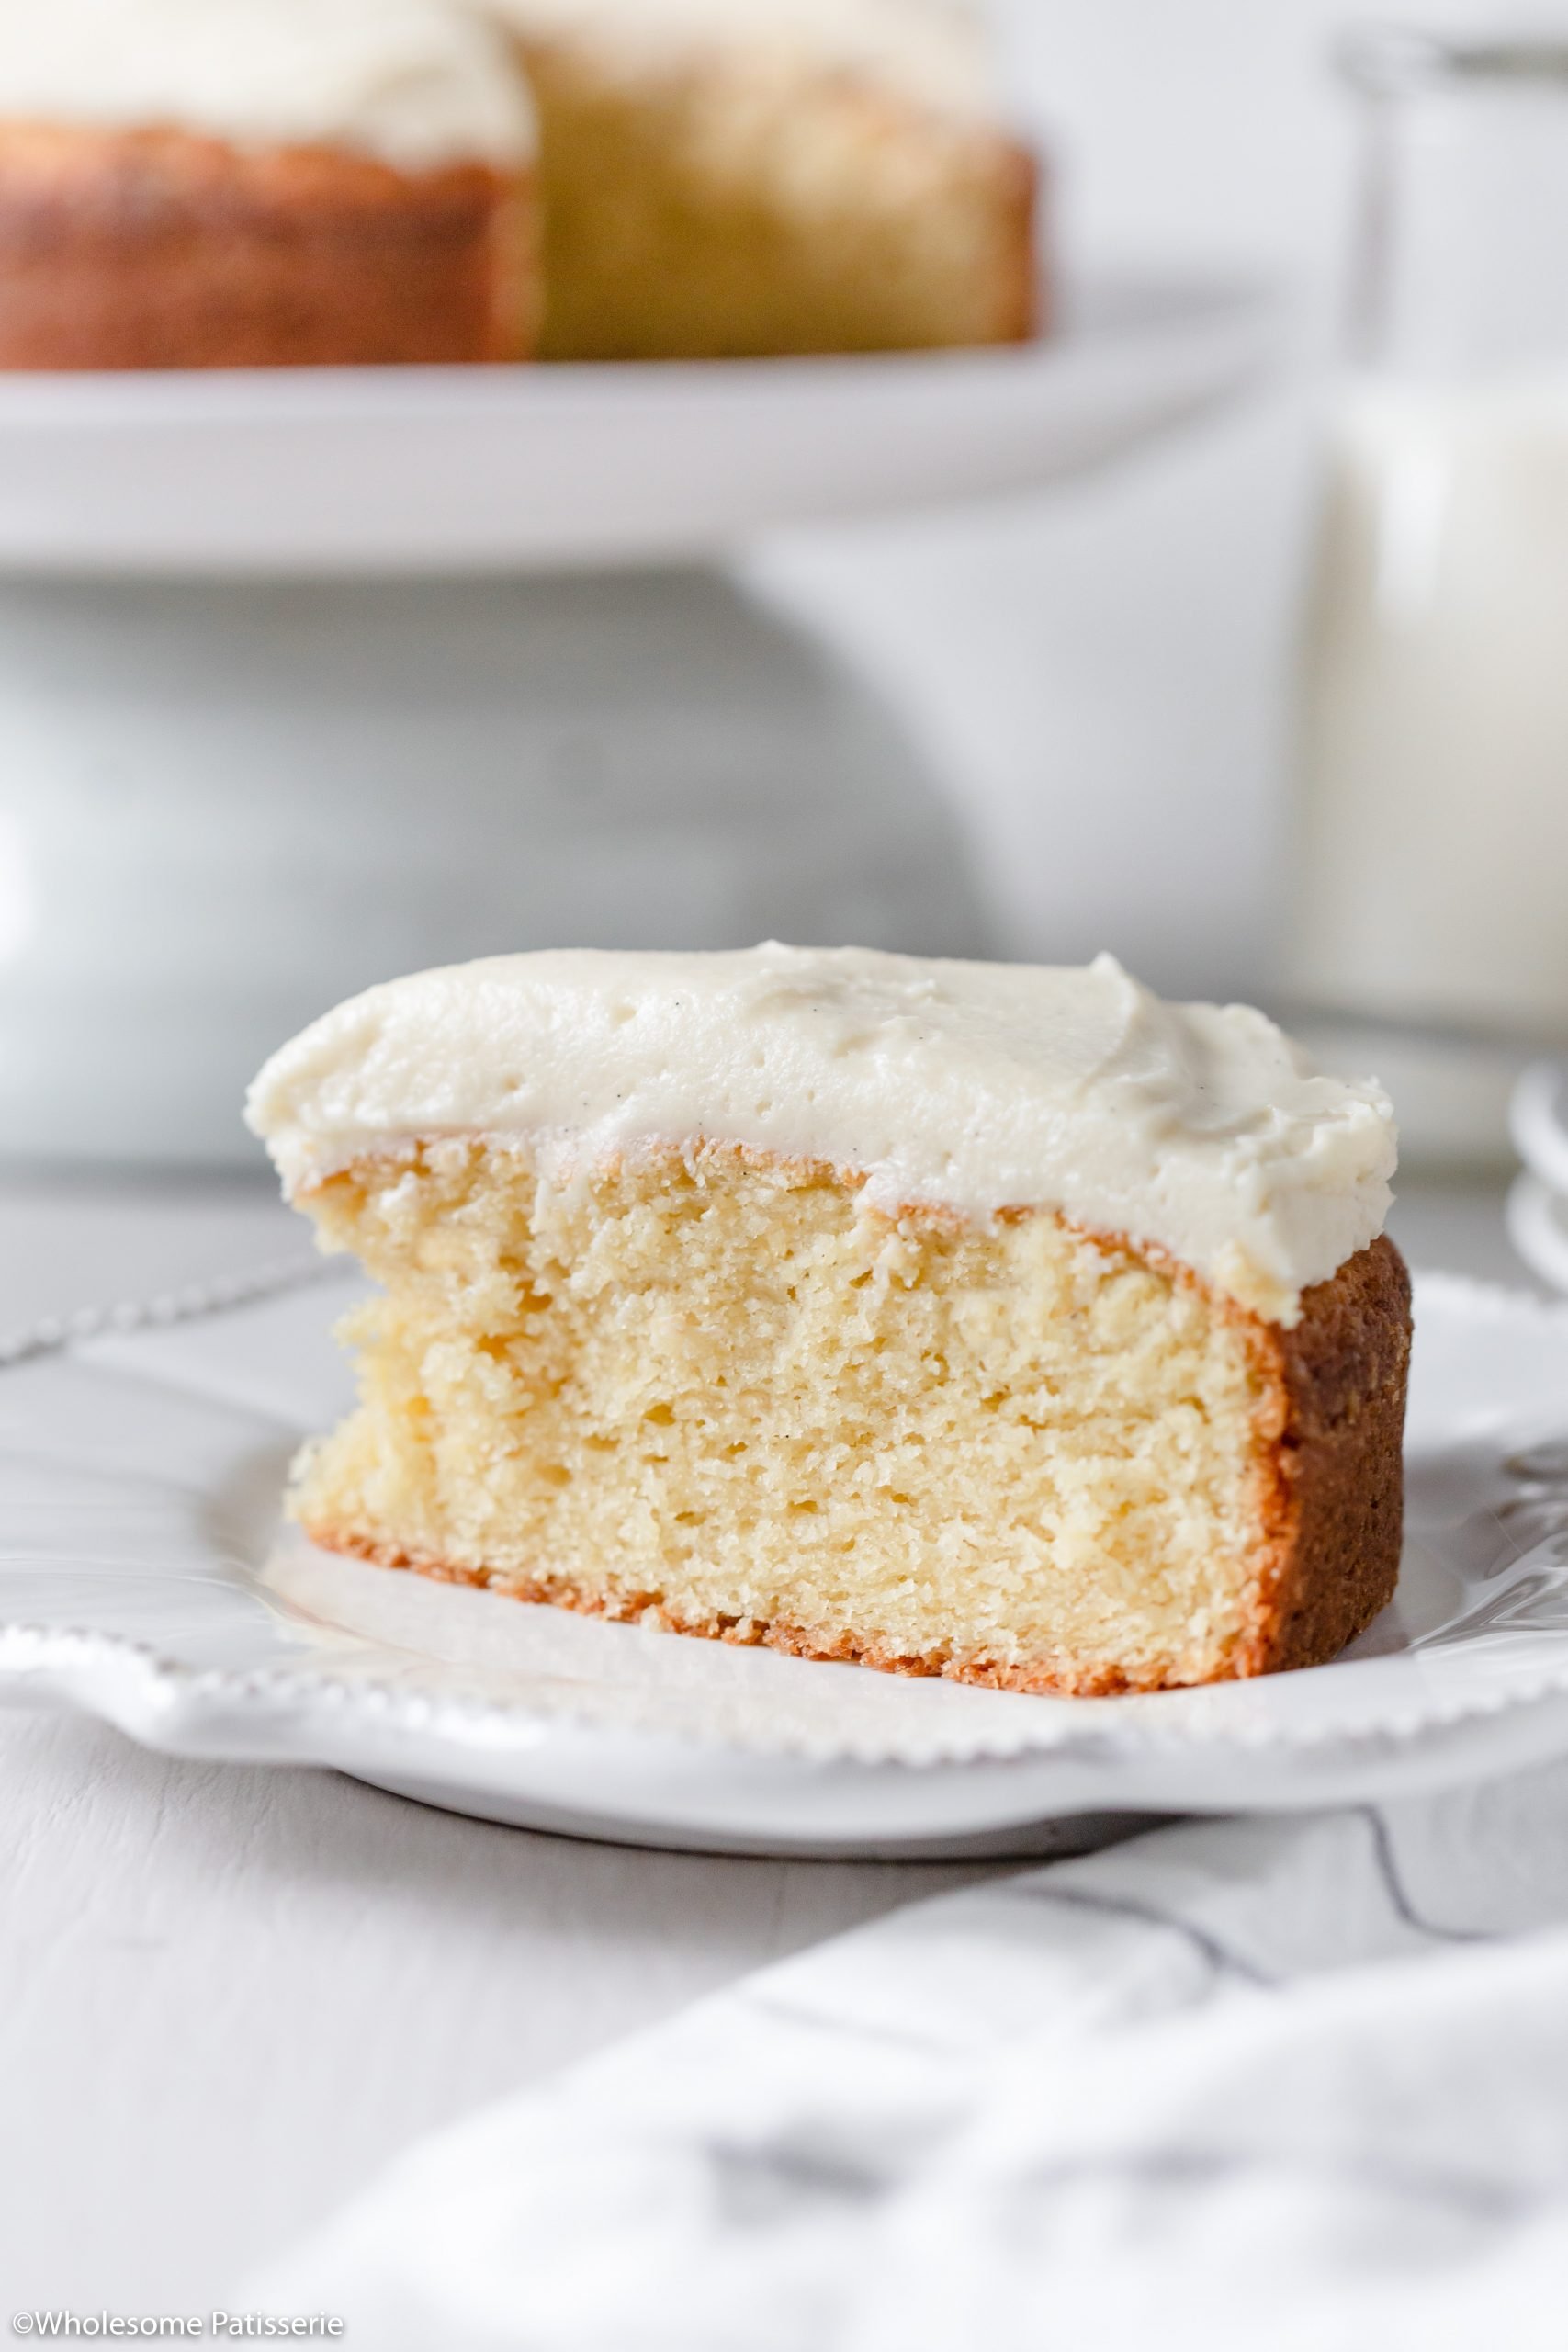 Basic Vanilla Cake! A simple yet flavoursome vanilla butter cake that is created in one bowl. Paired with a fluffy vanilla infused buttercream frosting. Consider this your go-to basic vanilla cake recipe that can be dressed up with different flavoured frostings of your choice. 